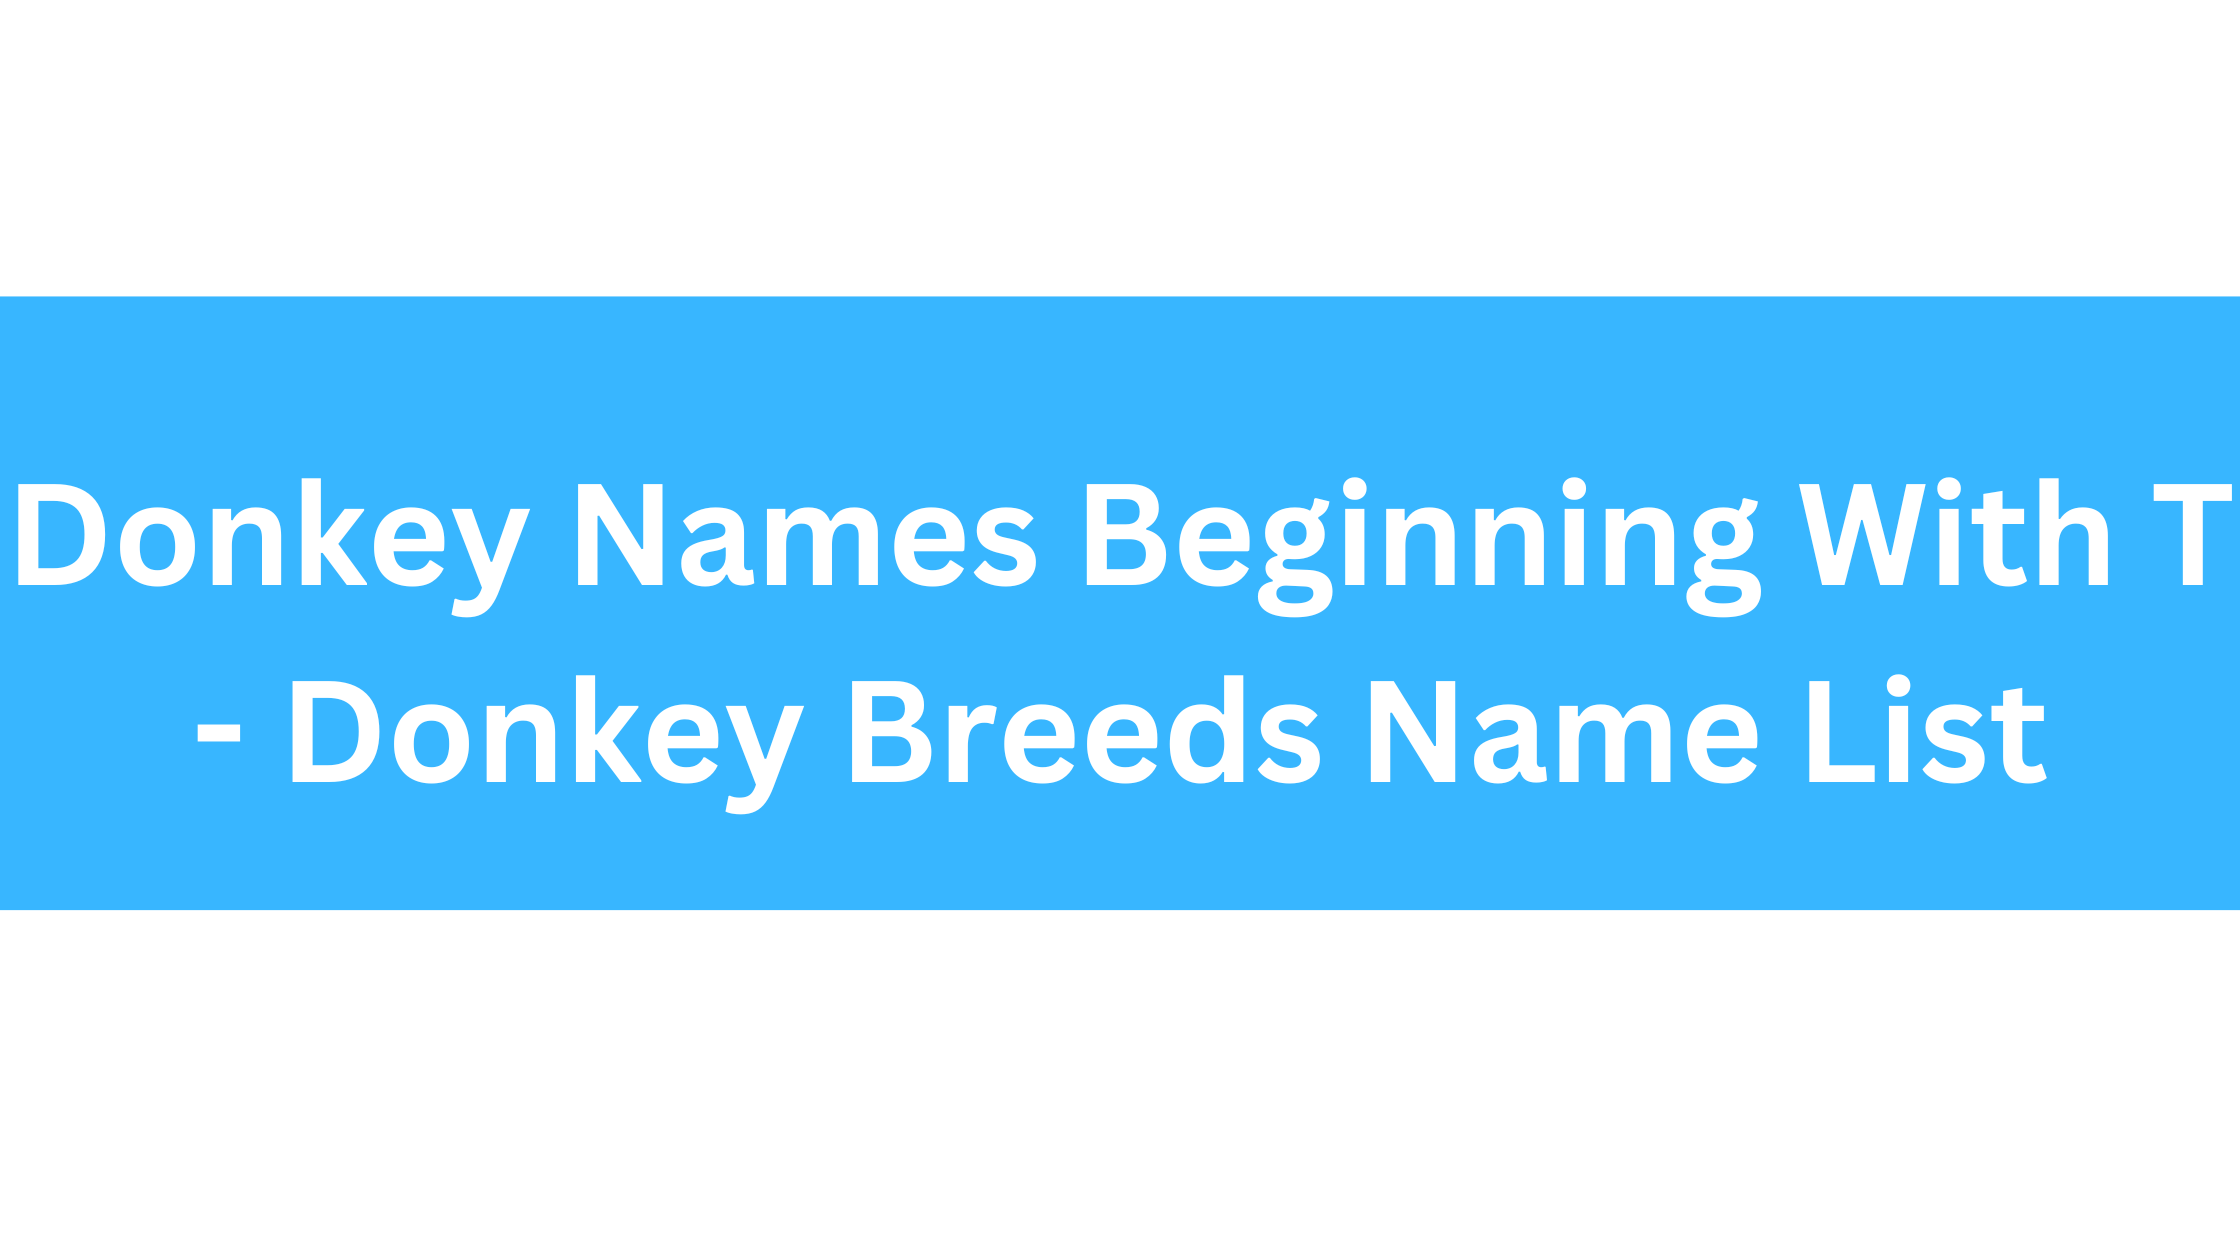 Donkey Names Beginning With T